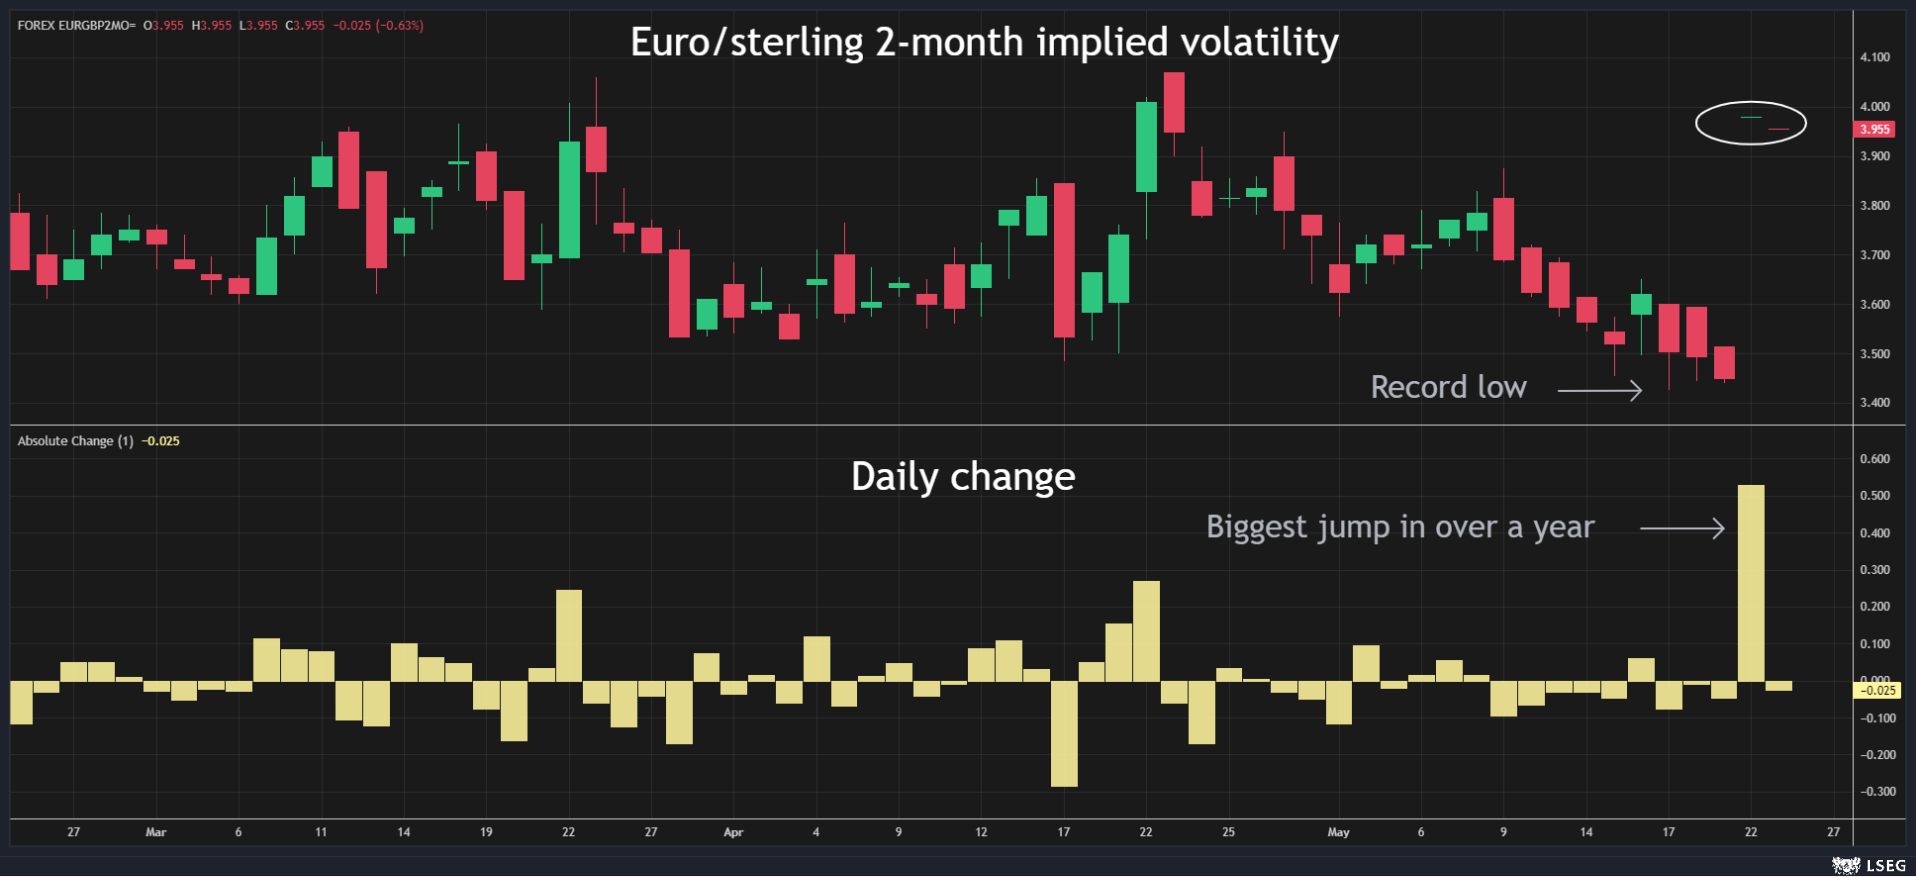 Euro/sterling 2-month vol lowest ever ... then jumps